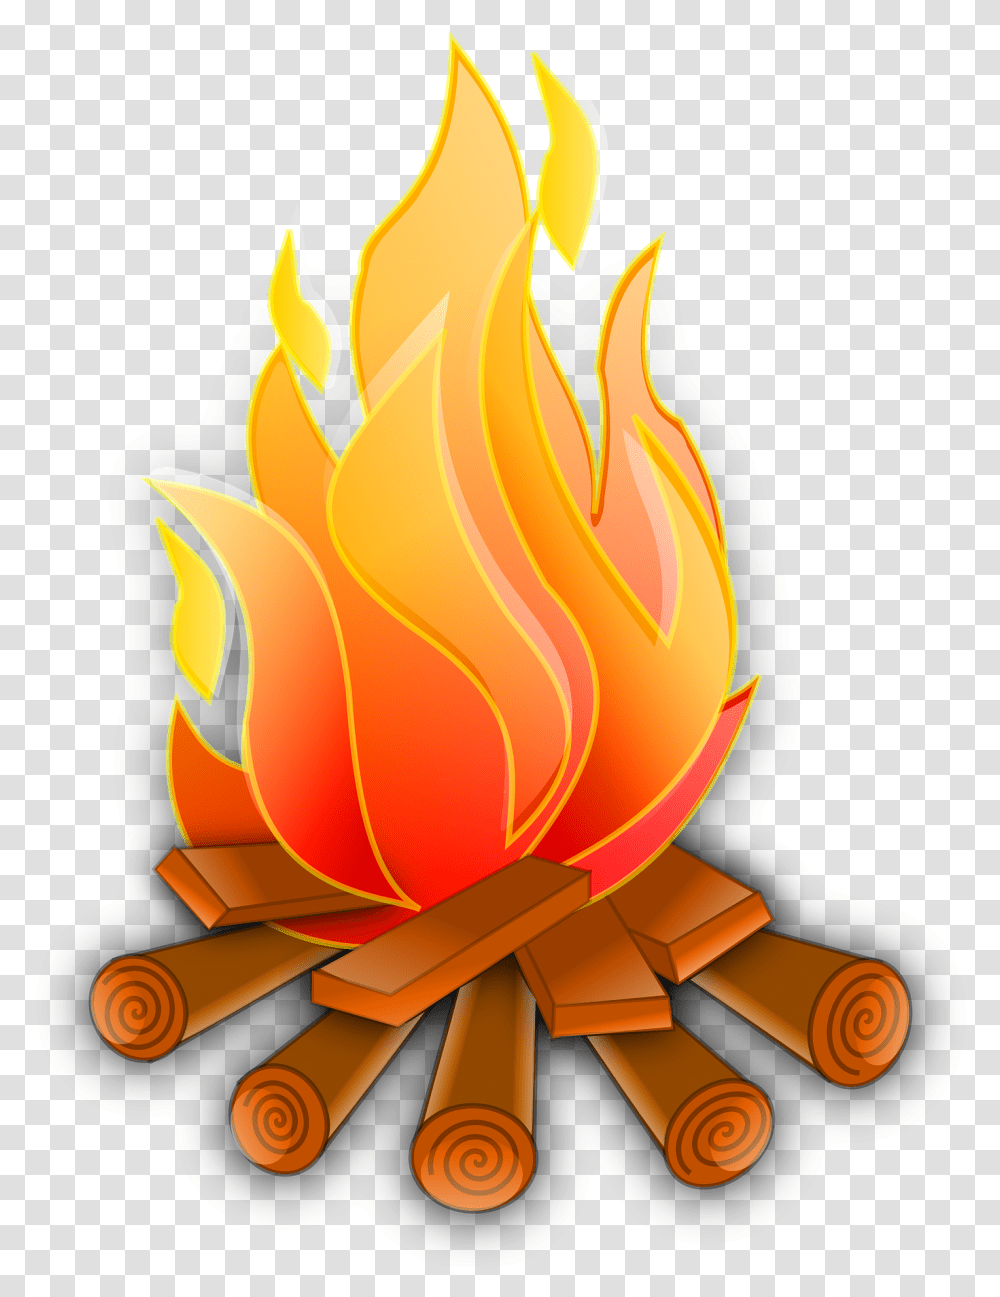 Download Campfire Vector Image For Free Camp Fire, Flame, Toy, Bonfire Transparent Png